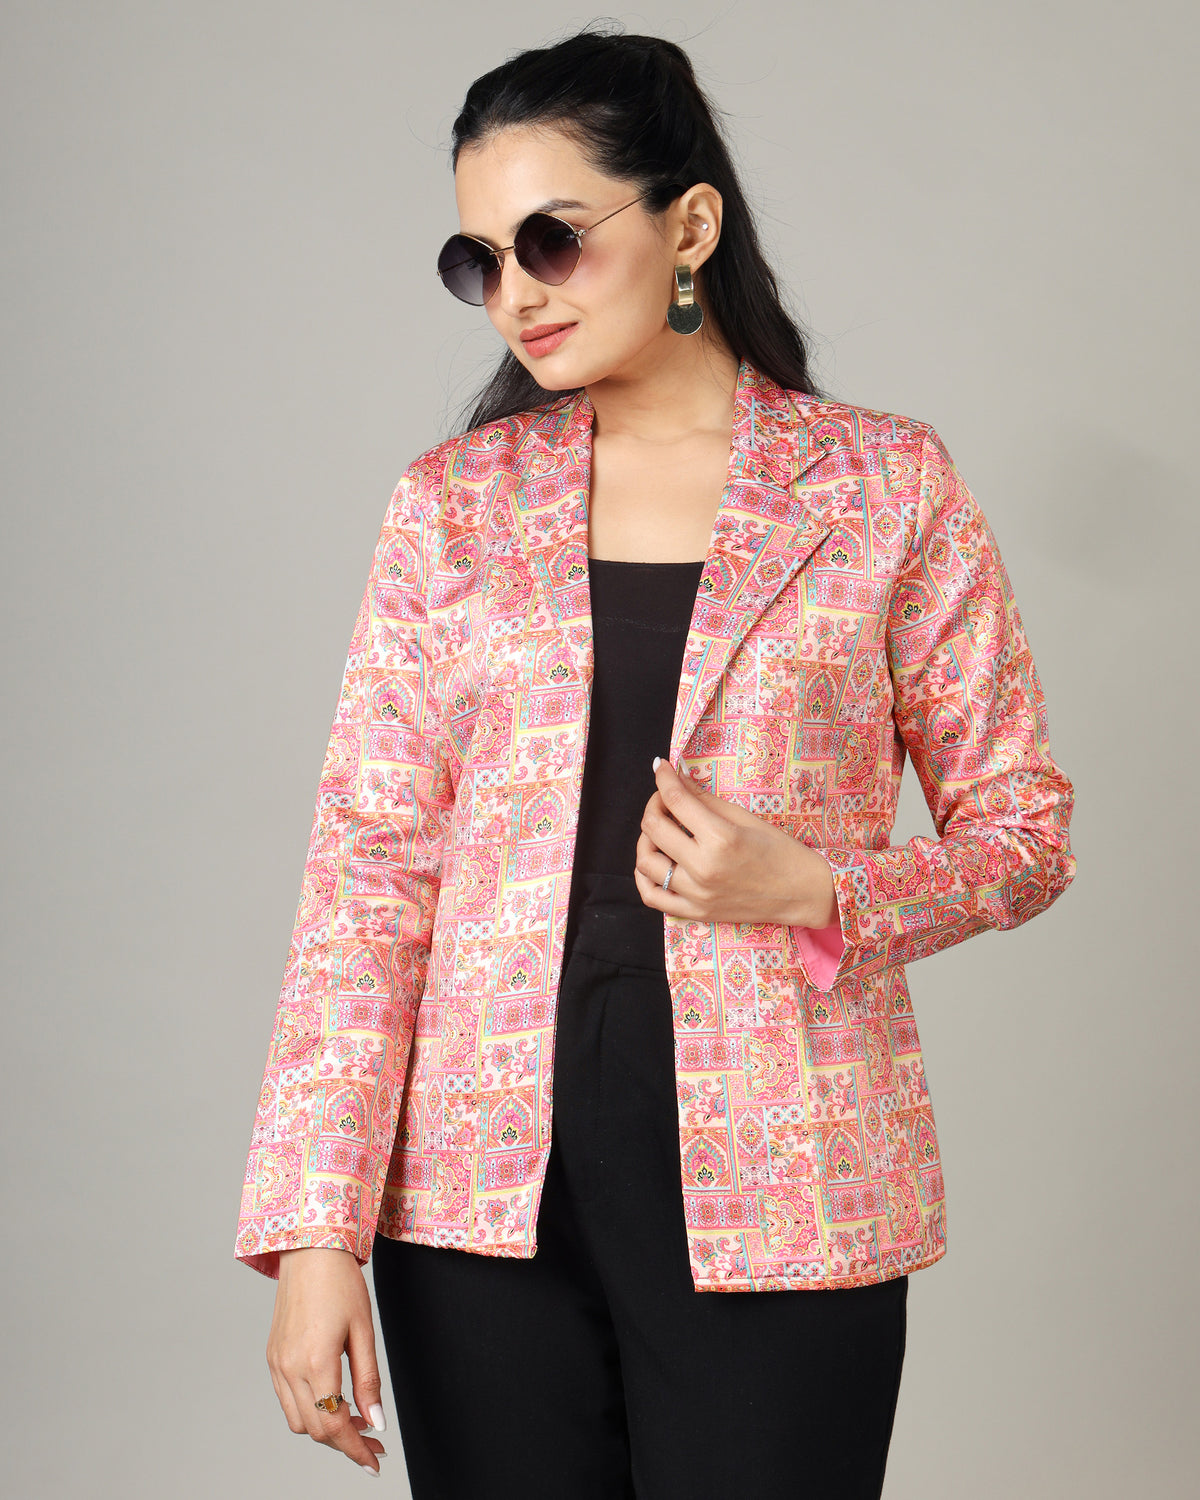 Heritage Chic-The Timeless Tradition Jacket For Women